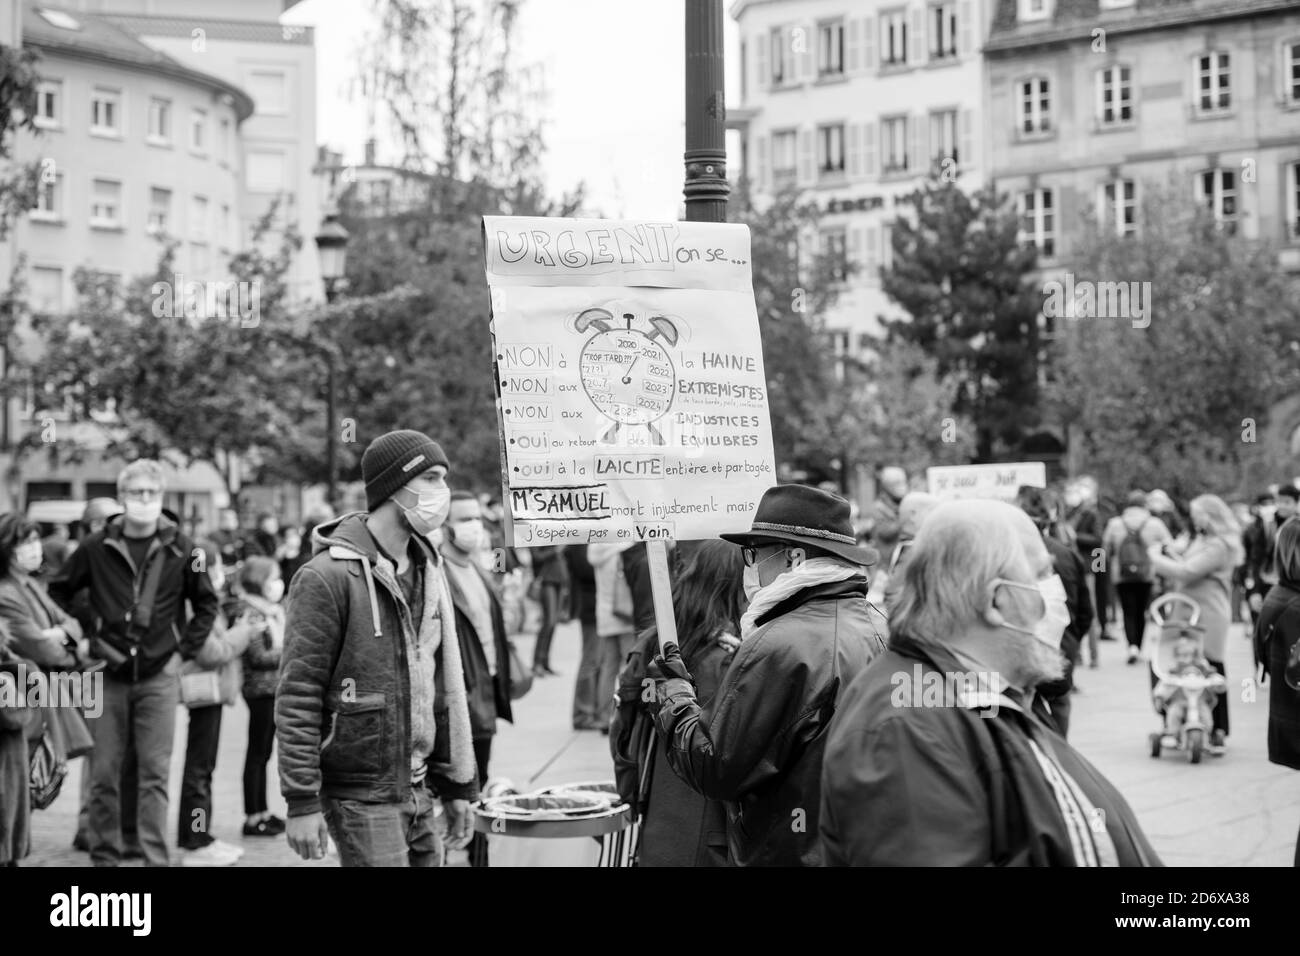 Strasbourg, France - Oct19, 2020: Man with placard in Place Kleber to pay tribute to history teacher Samuel Paty, beheaded on Oct16th after showing caricatures of Prophet Muhammad in class Stock Photo